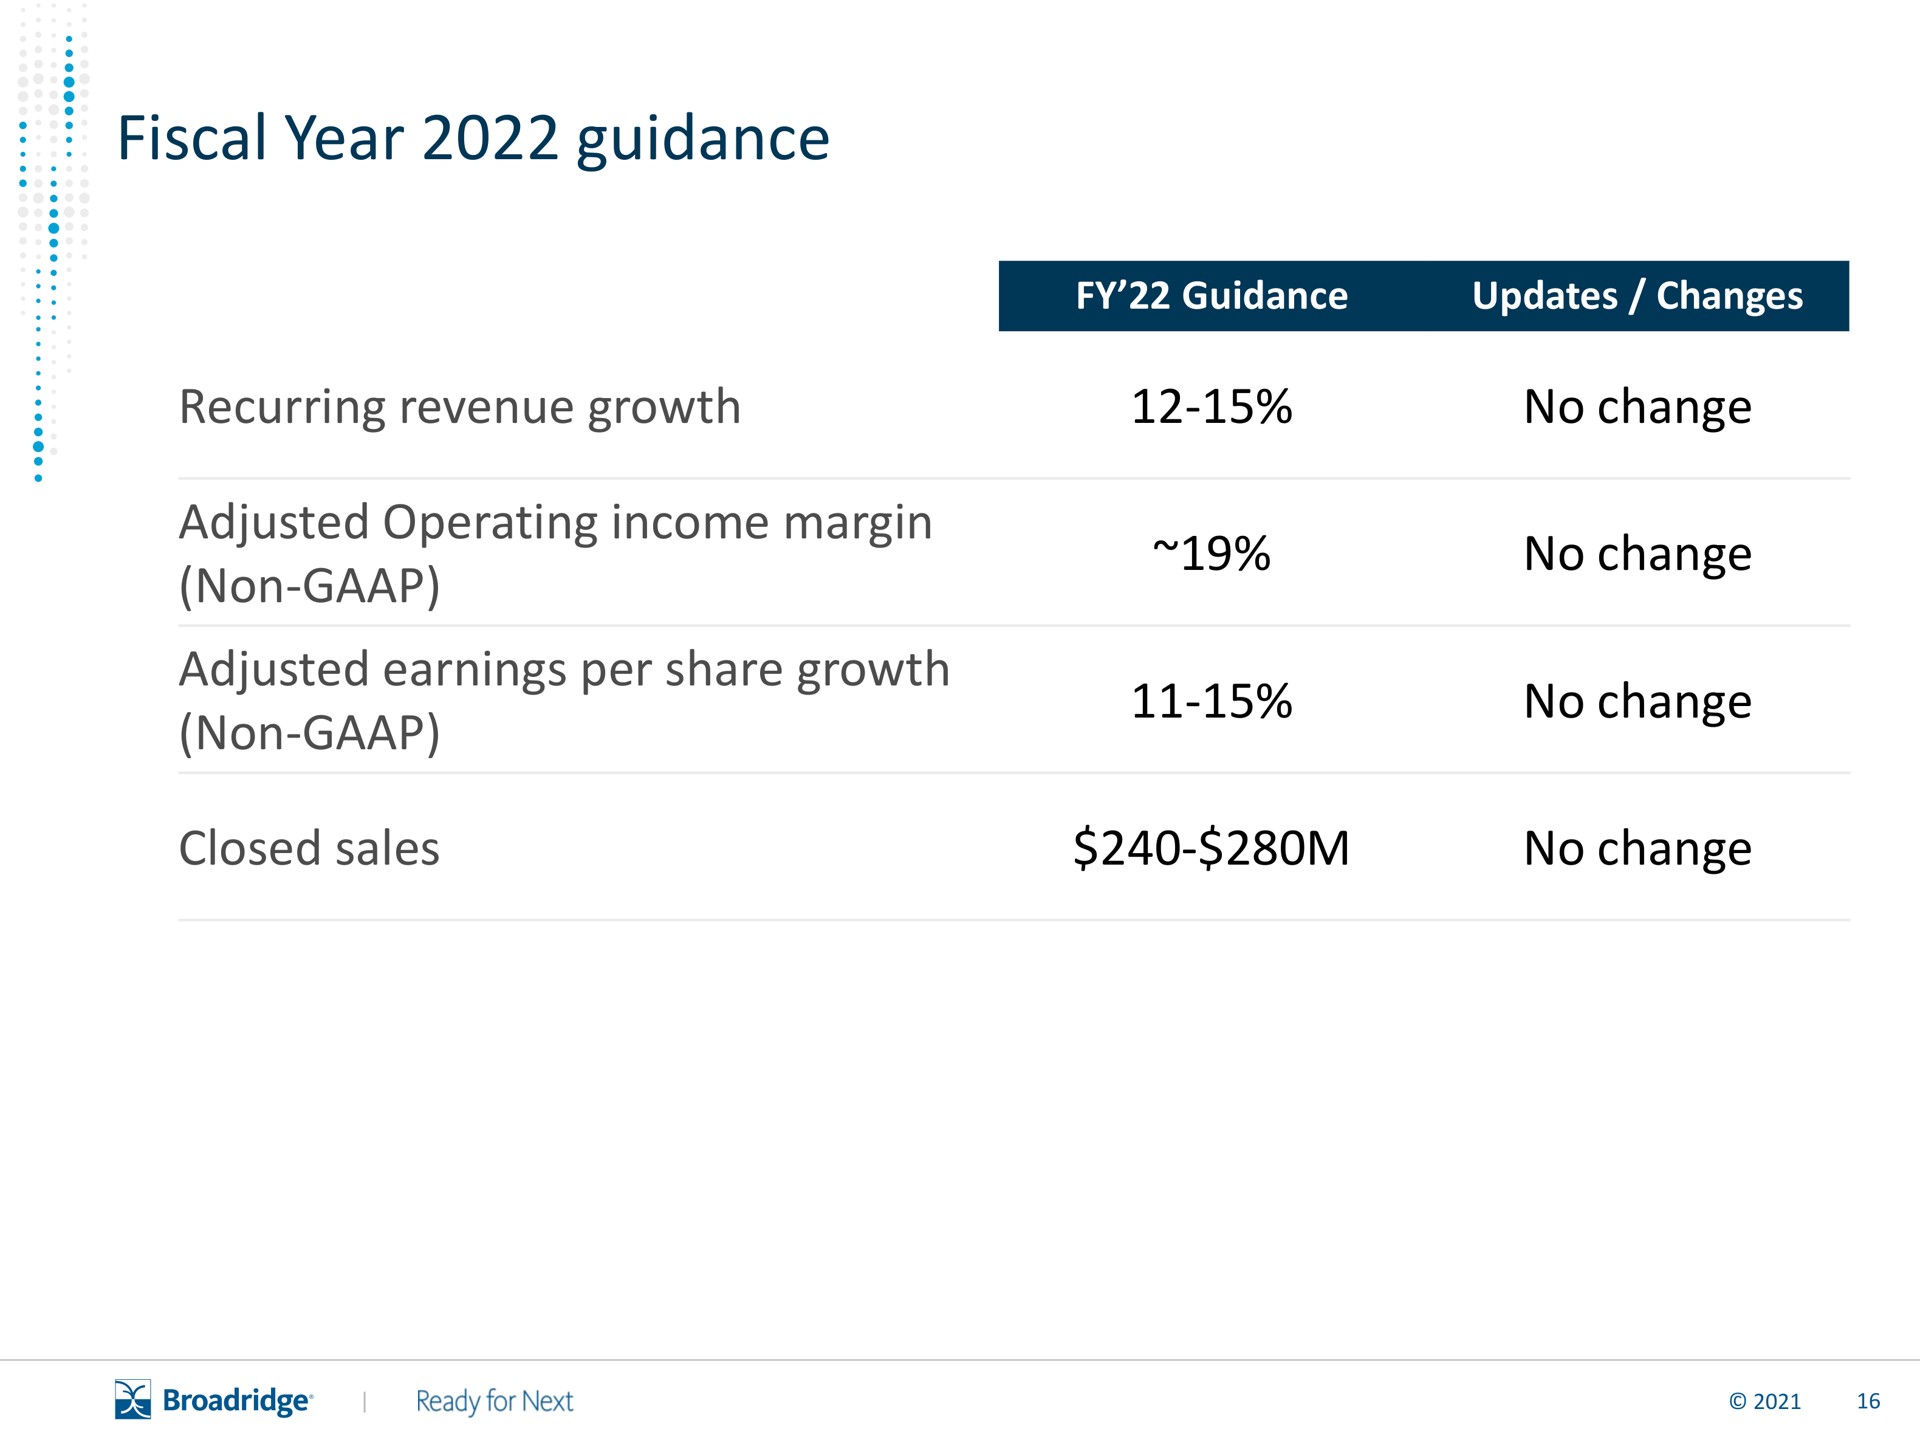 fiscal year guidance recurring revenue growth no change adjusted operating income margin non adjusted earnings per share growth non no change no change closed sales no change | Broadridge Financial Solutions